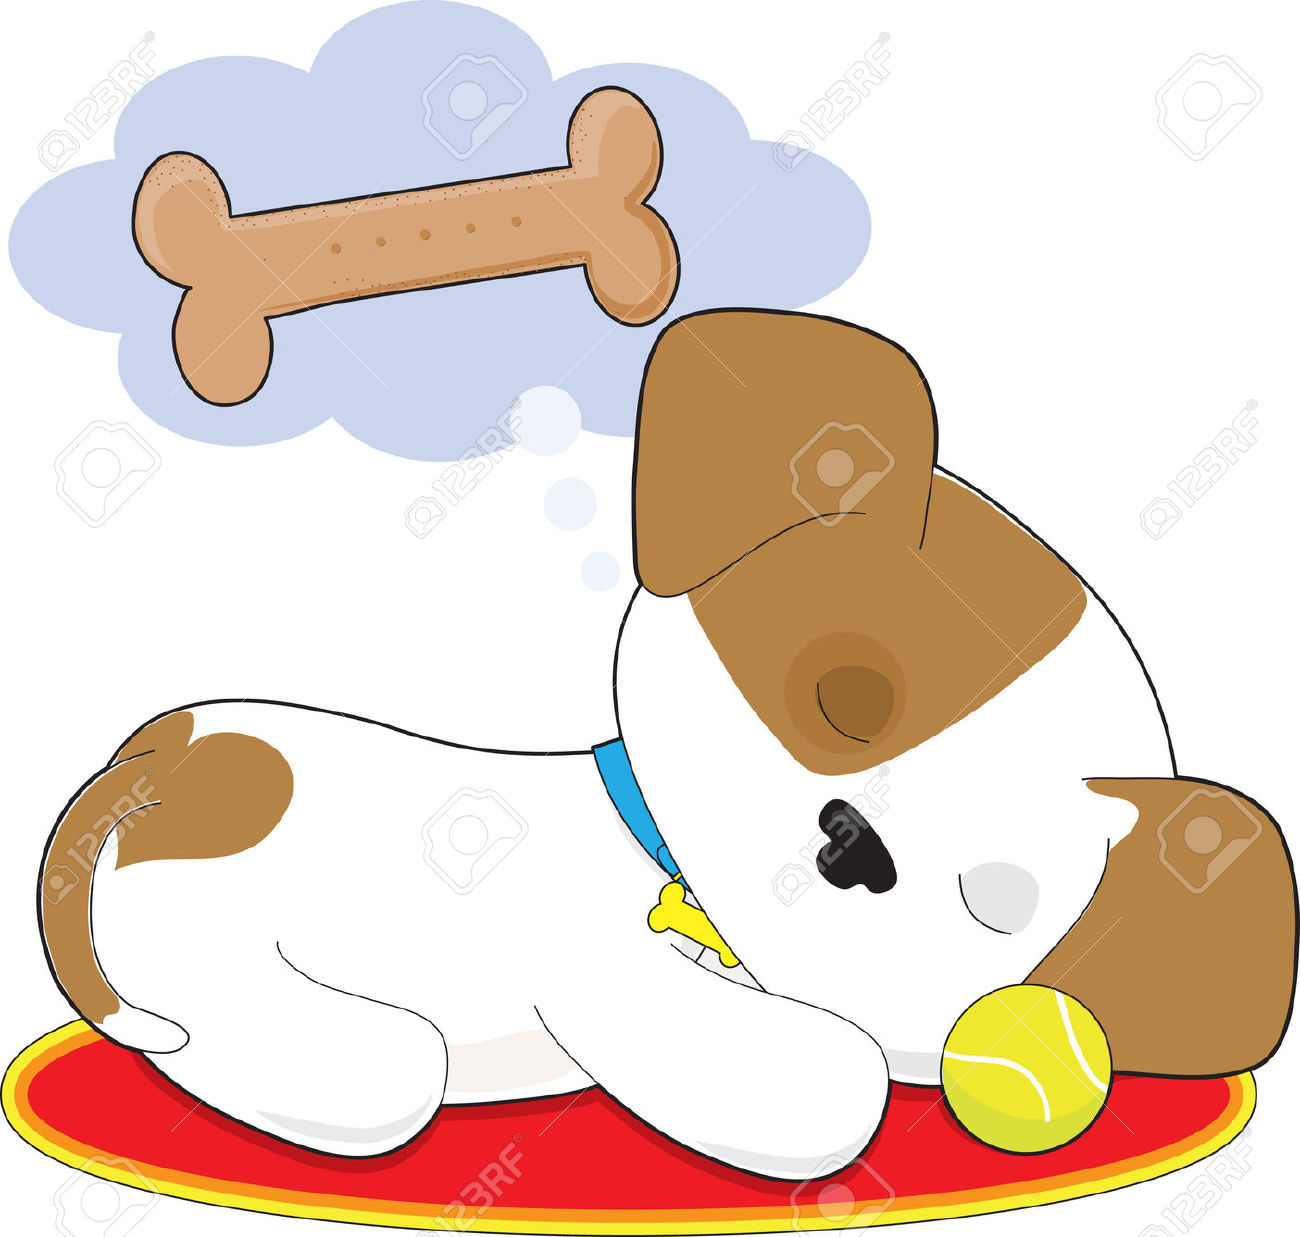 Image result for designer puppies clipart